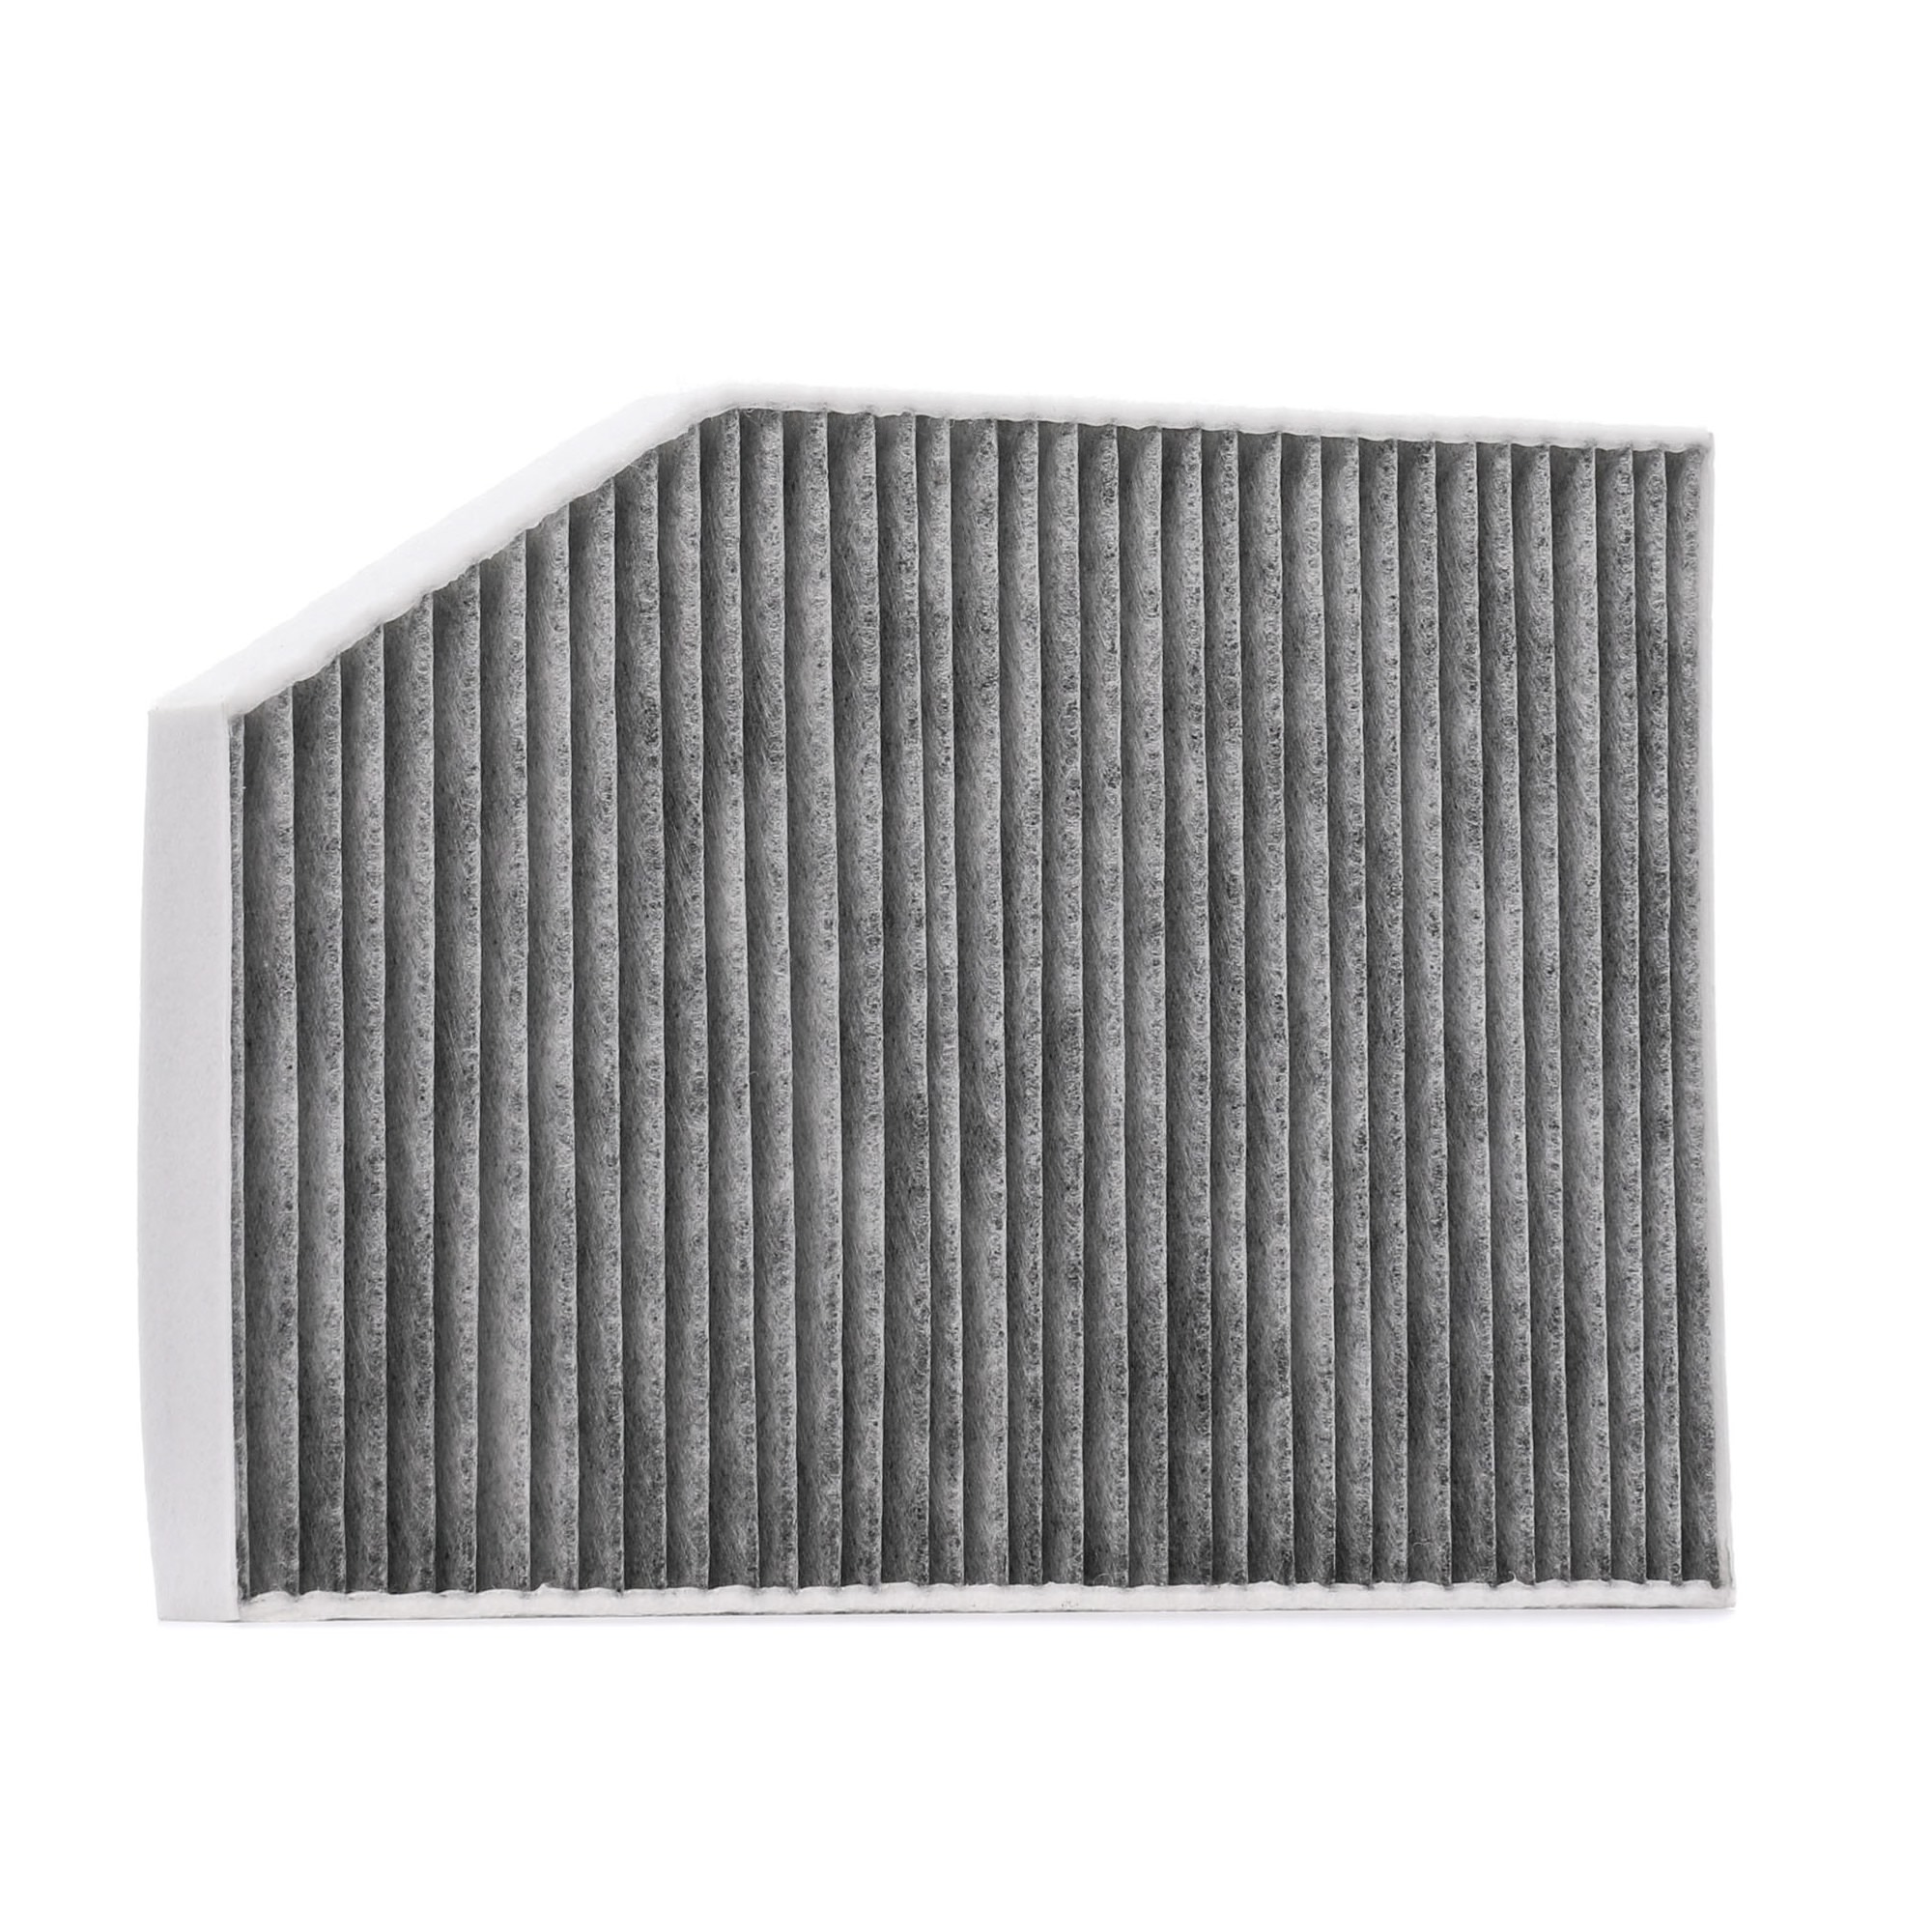 BMW 3 Series Air conditioning filter 18229576 RIDEX 424I0777 online buy